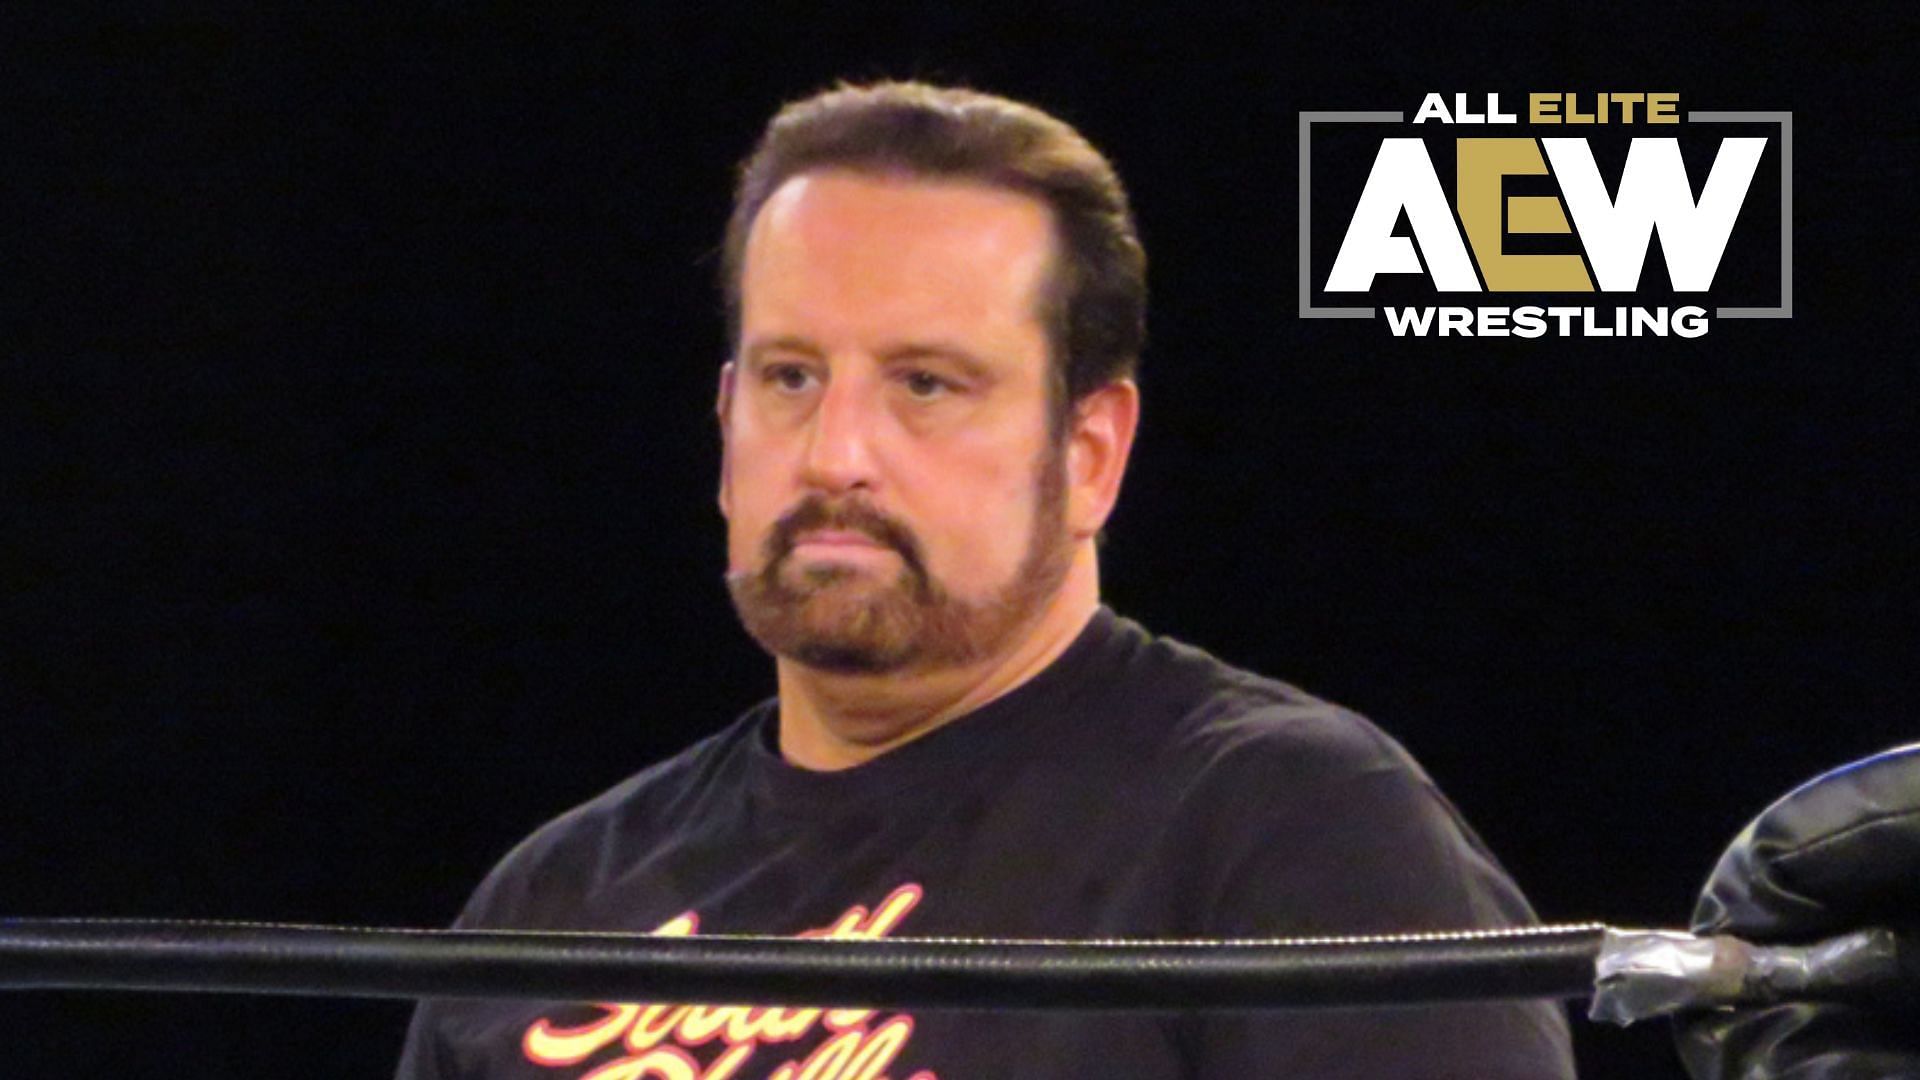 Tommy Dreamer is a former ECW champion